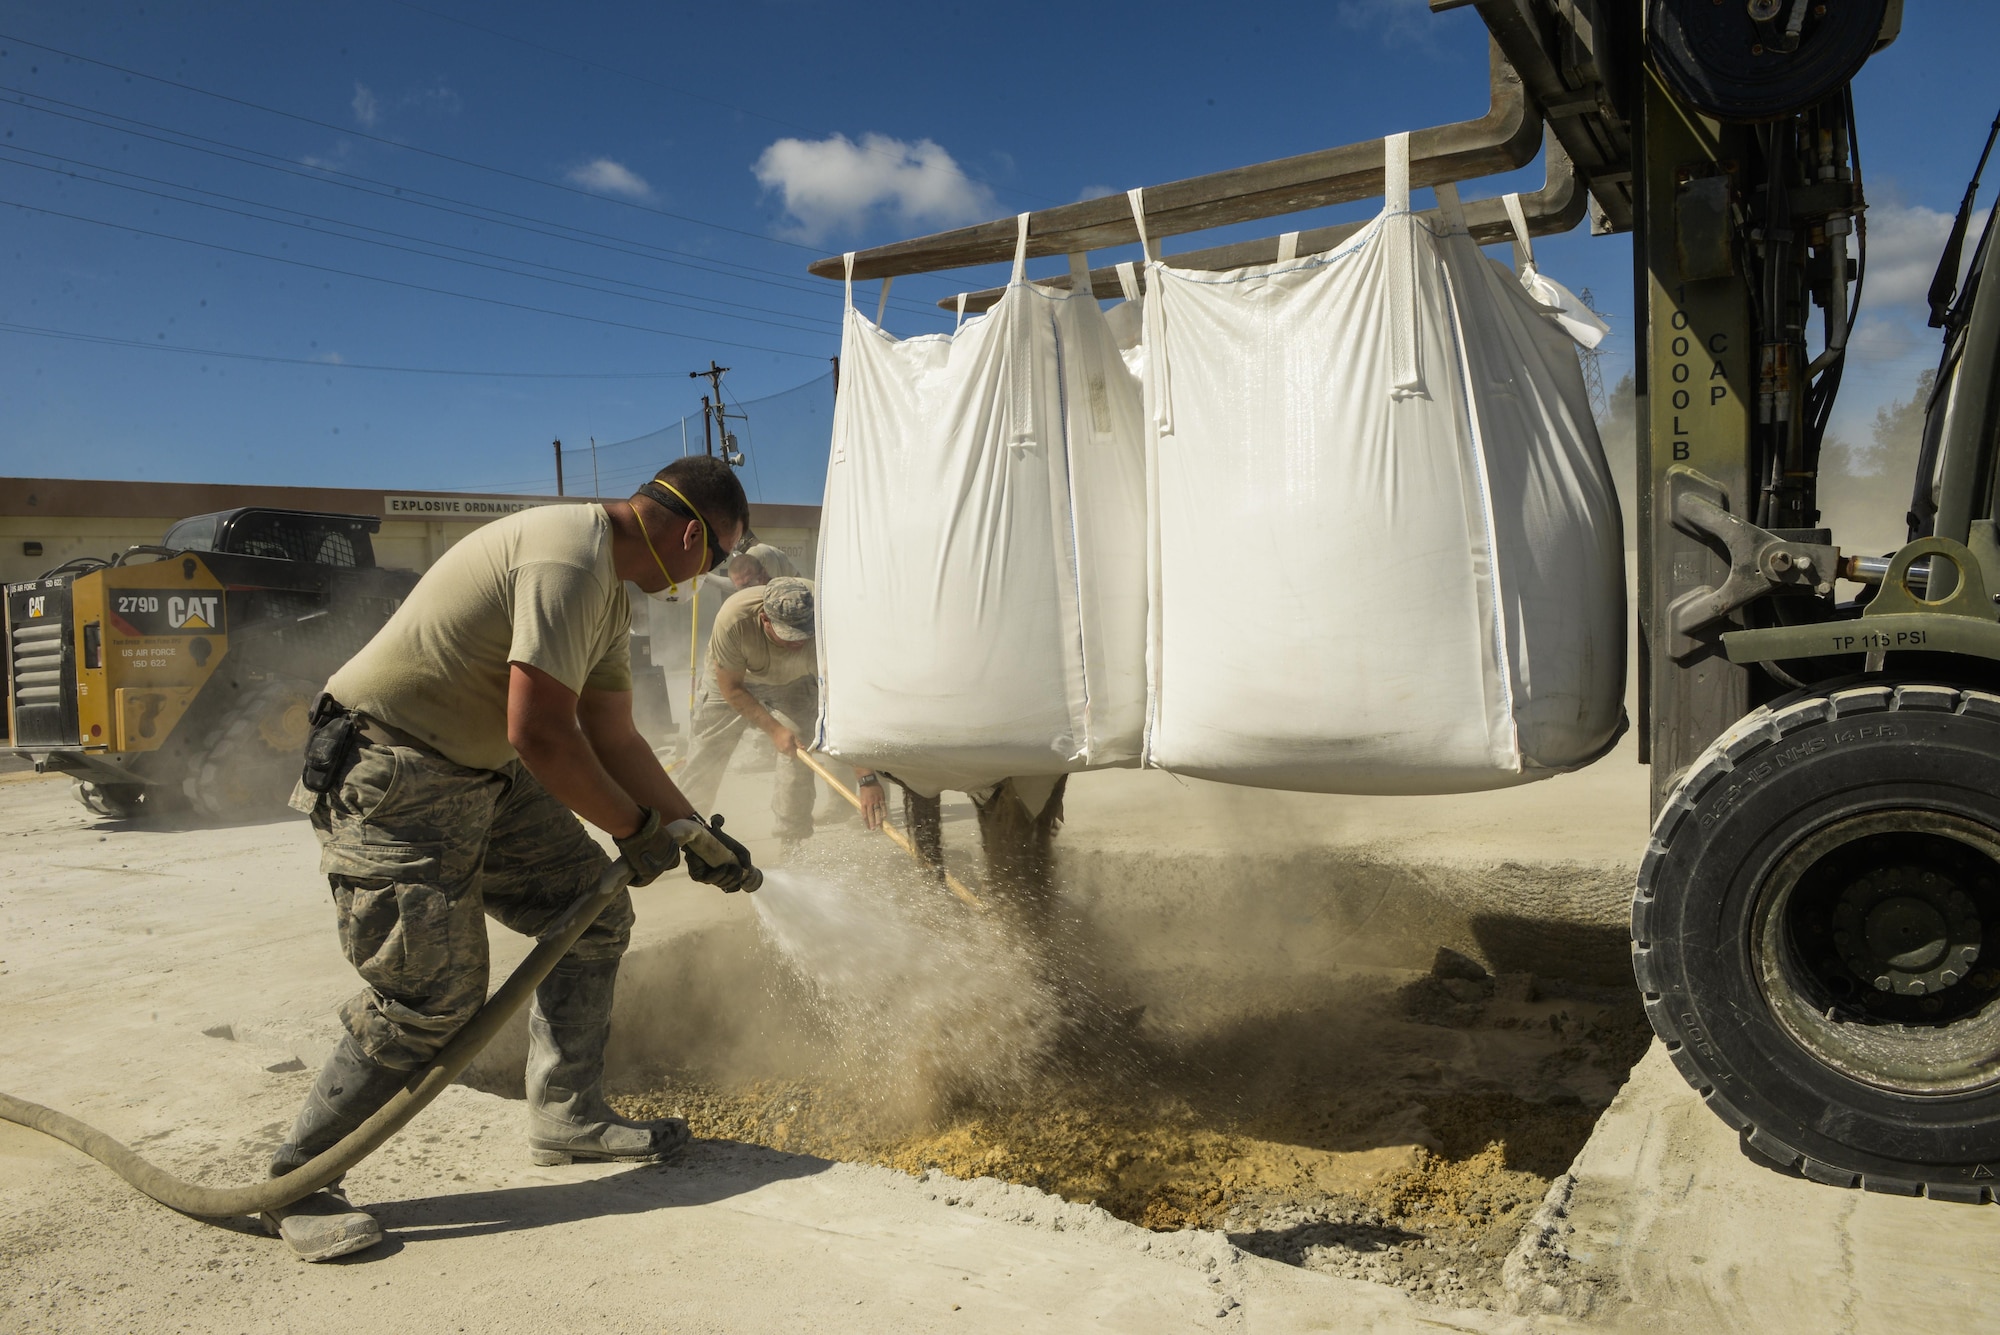 A joint team of U.S. Air Force Airmen from the Kadena, Yakota and Misawa civil engineer squadrons mix water and a low-strength concrete together during airfield damage repair training exercise Sept, 15, 2016, at Kadena Air Base, Japan. During the RADR Airmen clear the debris from the surface of the flightline using heavy equipment such as bulldozers and then cut a square around the damaged areas or craters with a specialized saw. (U.S. Air Force photo by Senior Airman Stephen G. Eigel)